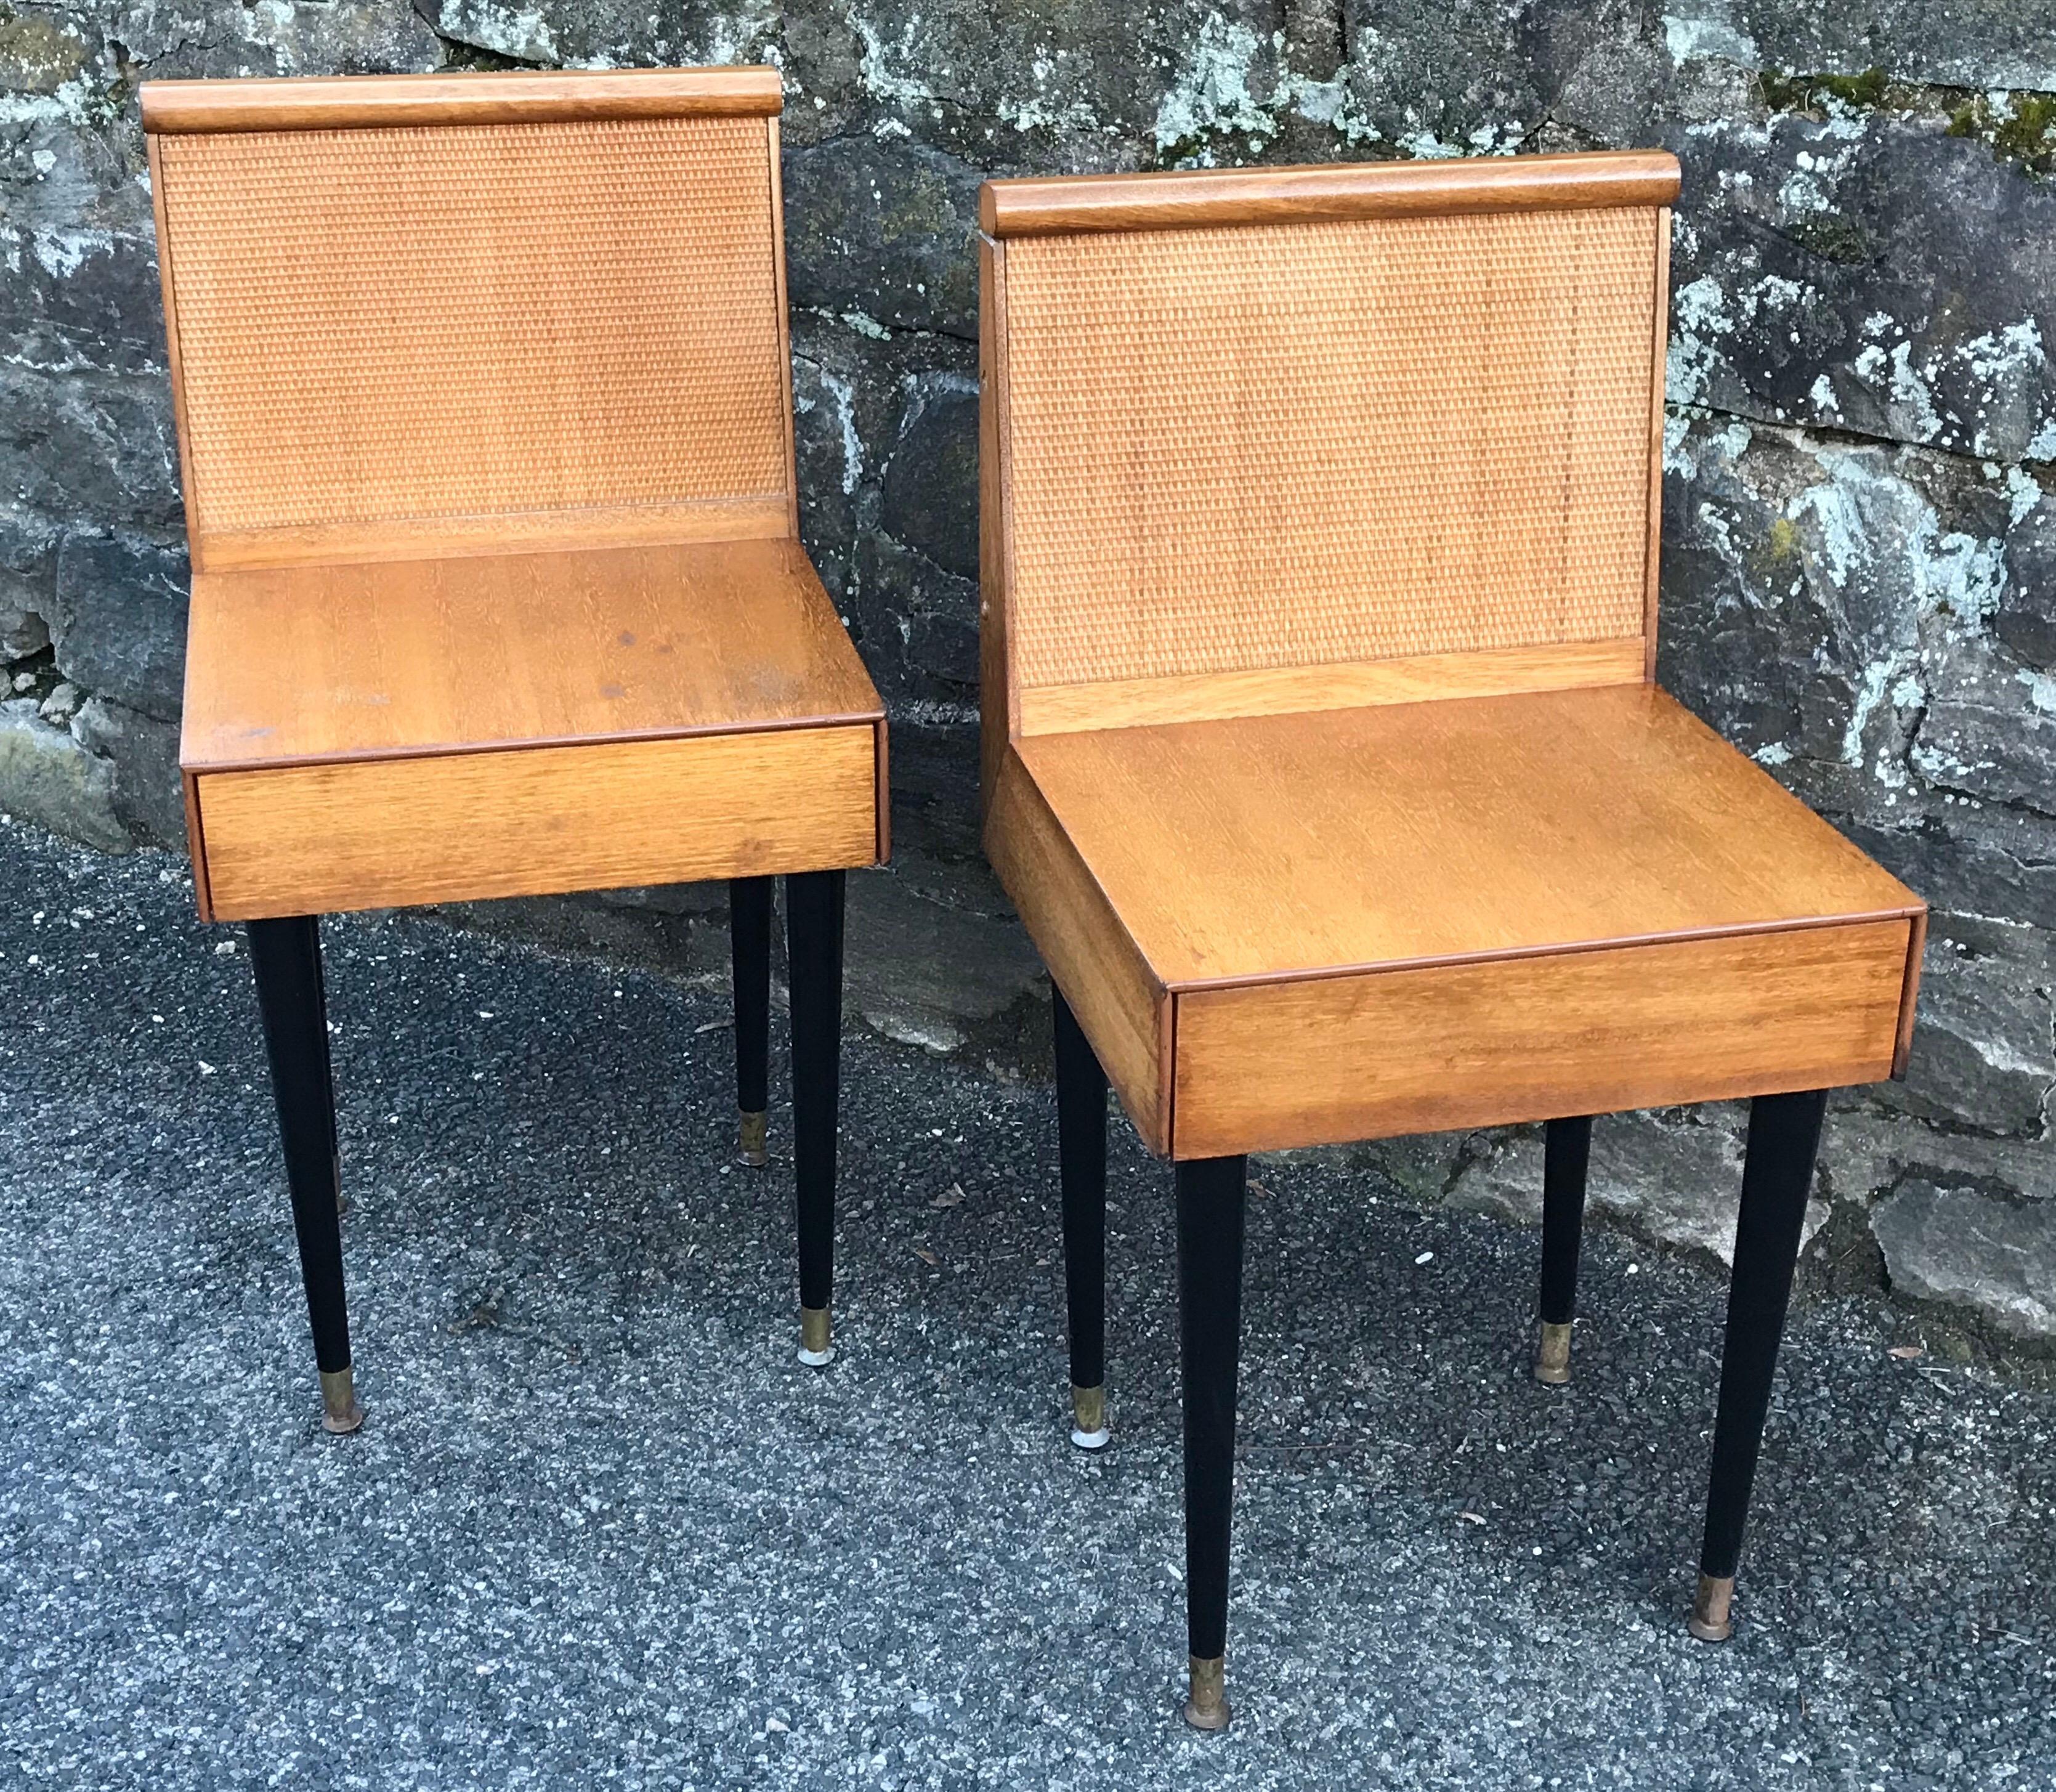 Rare pair of petite and refined nightstands designed by John Keal for Brown Saltman, circa 1950. Constructed of bleached mahogany with caned back panel and one drawer. The nightstands obtain their original black lacquer finish tapered legs and brass